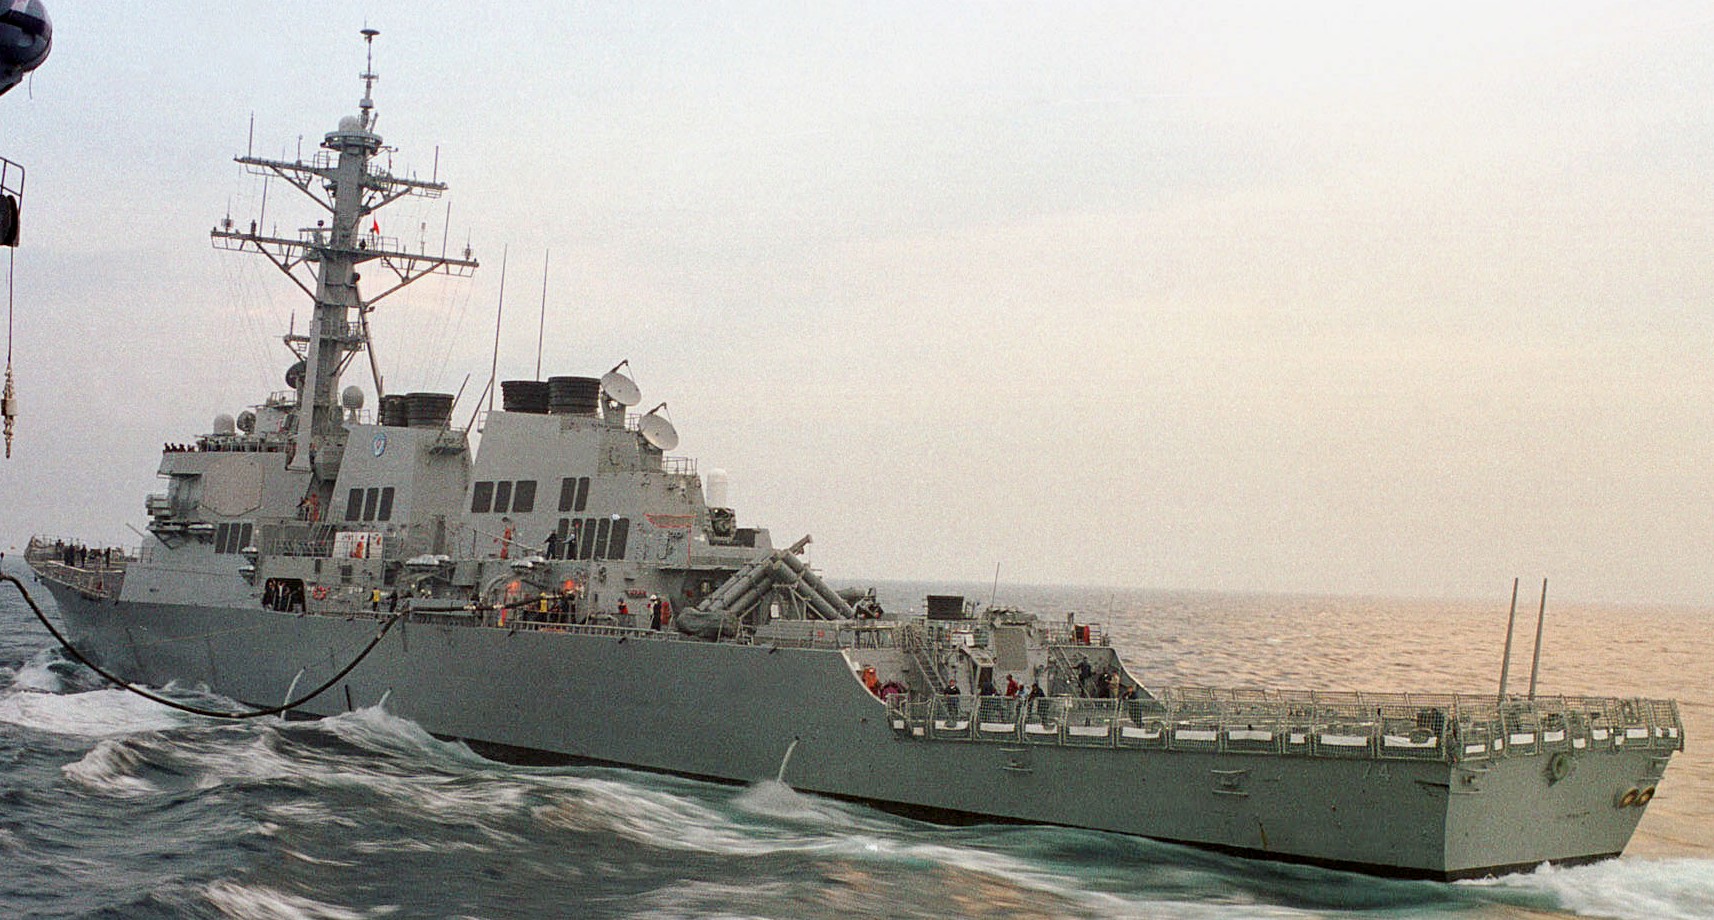 ddg-74 uss mcfaul guided missile destroyer arleigh burke class aegis bmd 56